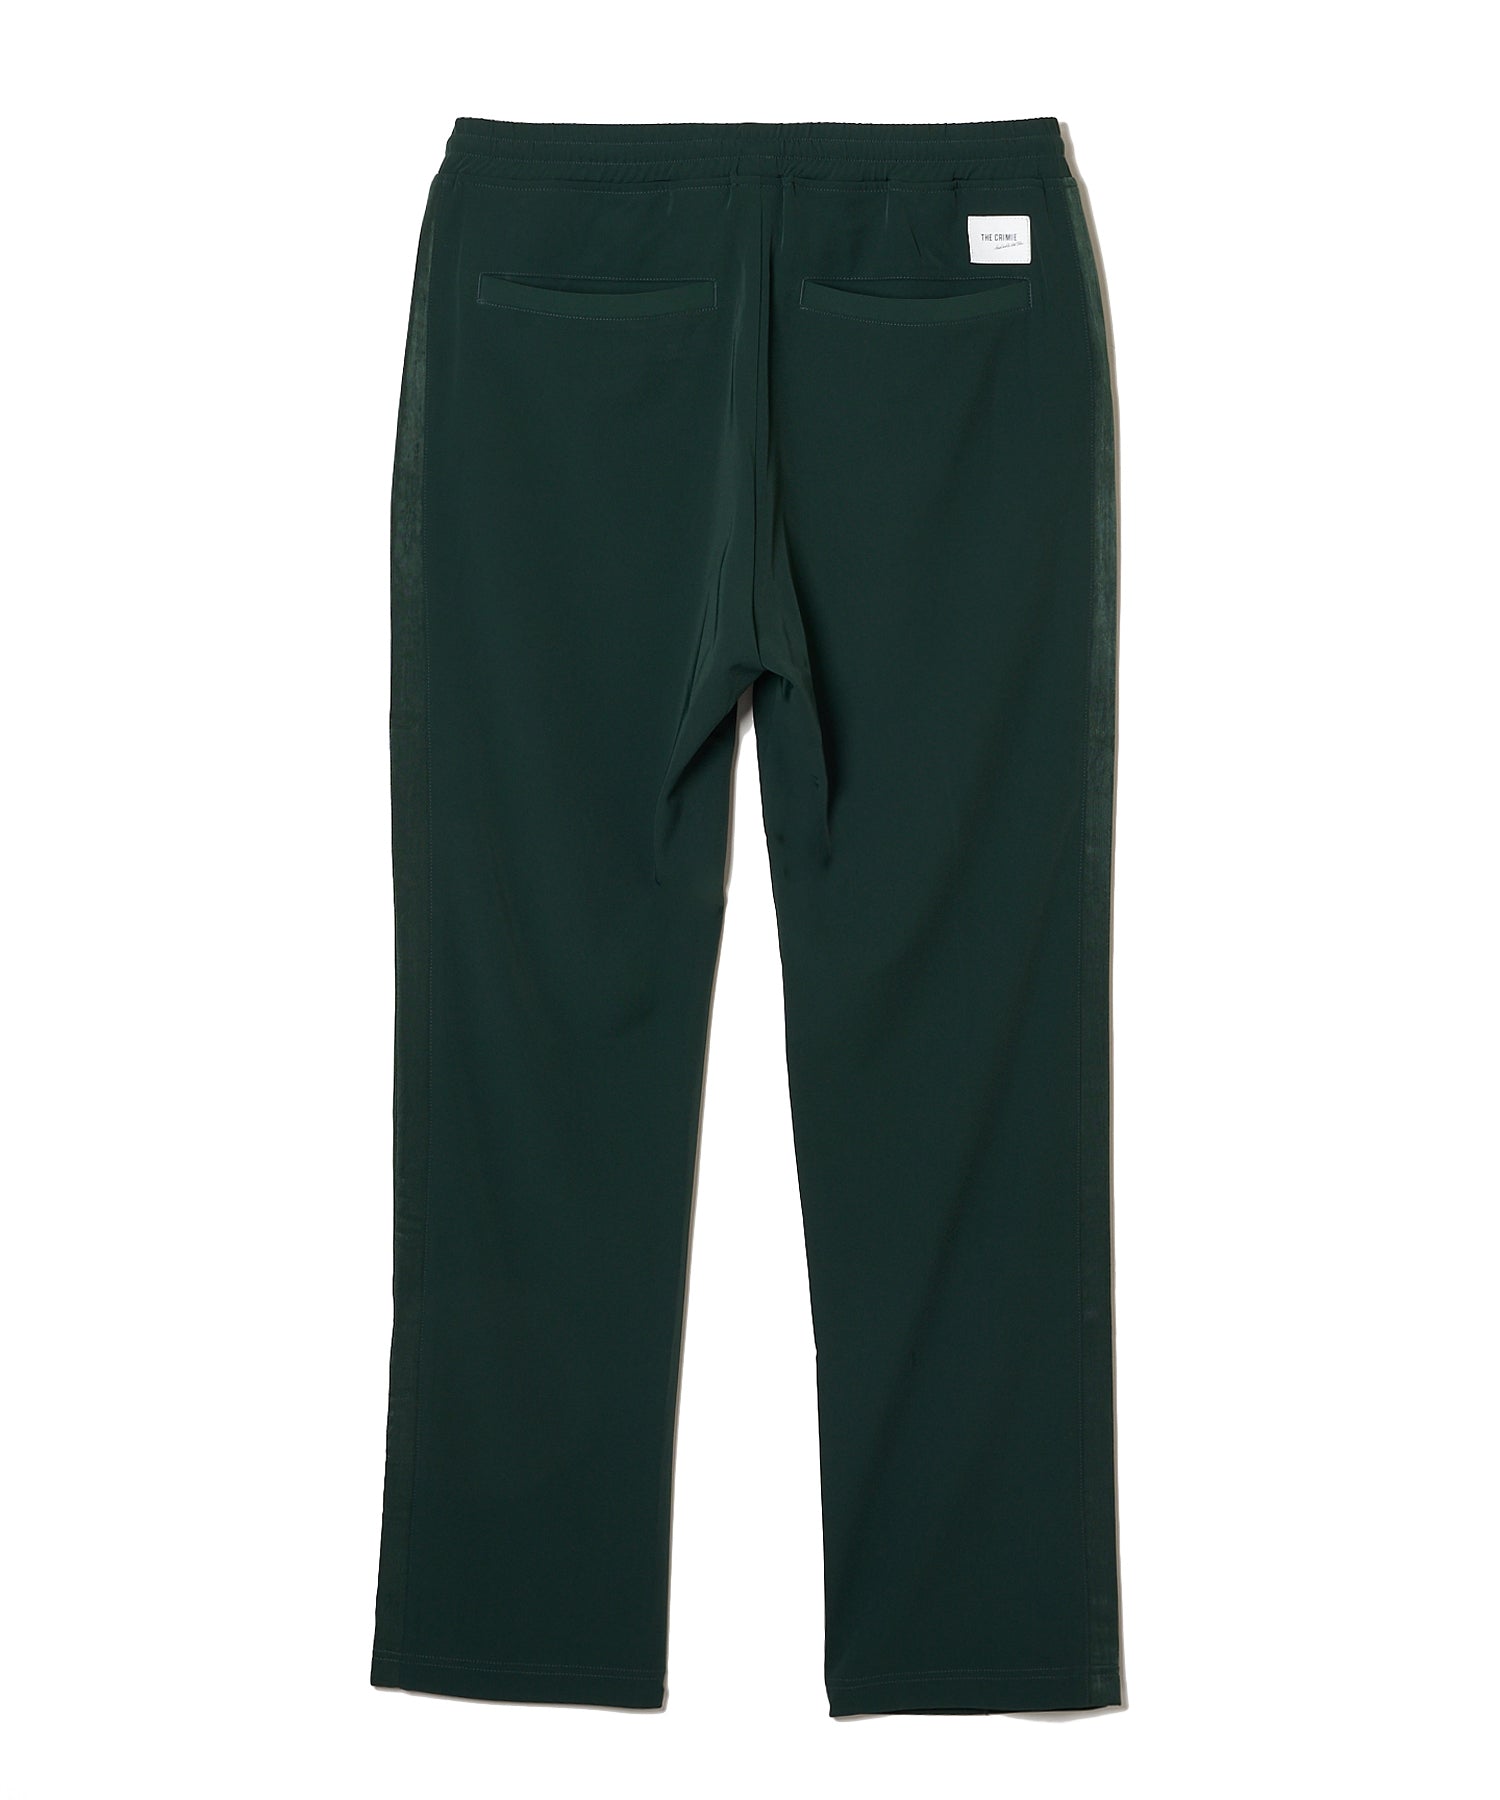 EASY CARE EMBROIDERY TRACK PANTS